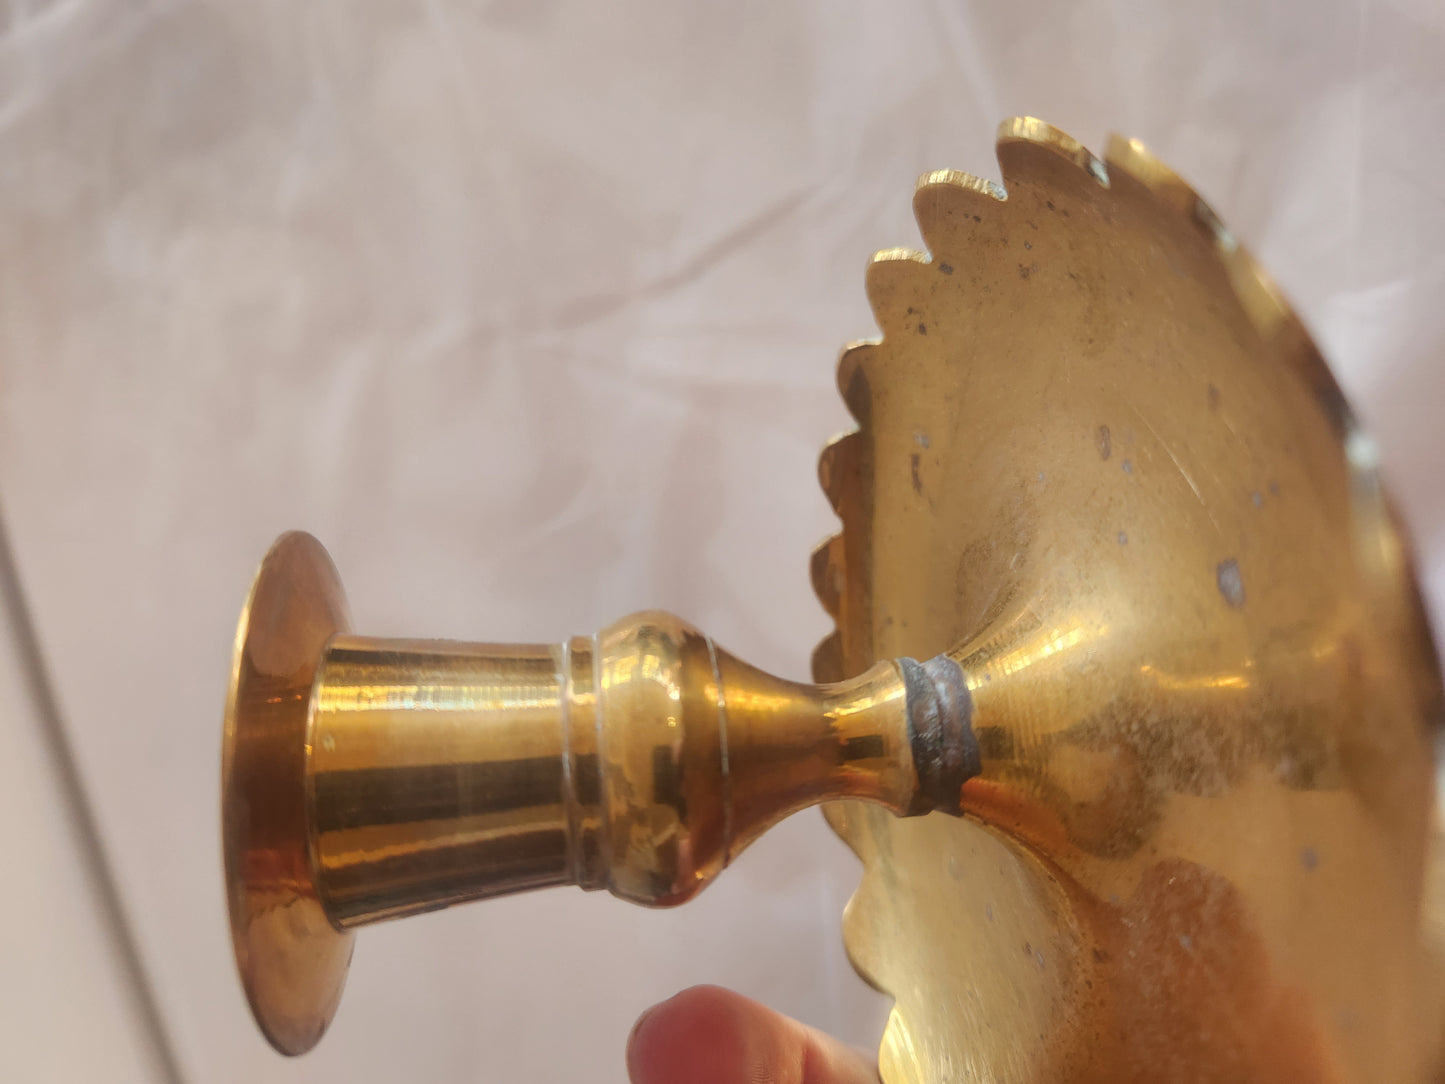 Scalloped Edge Brass Candle Holder